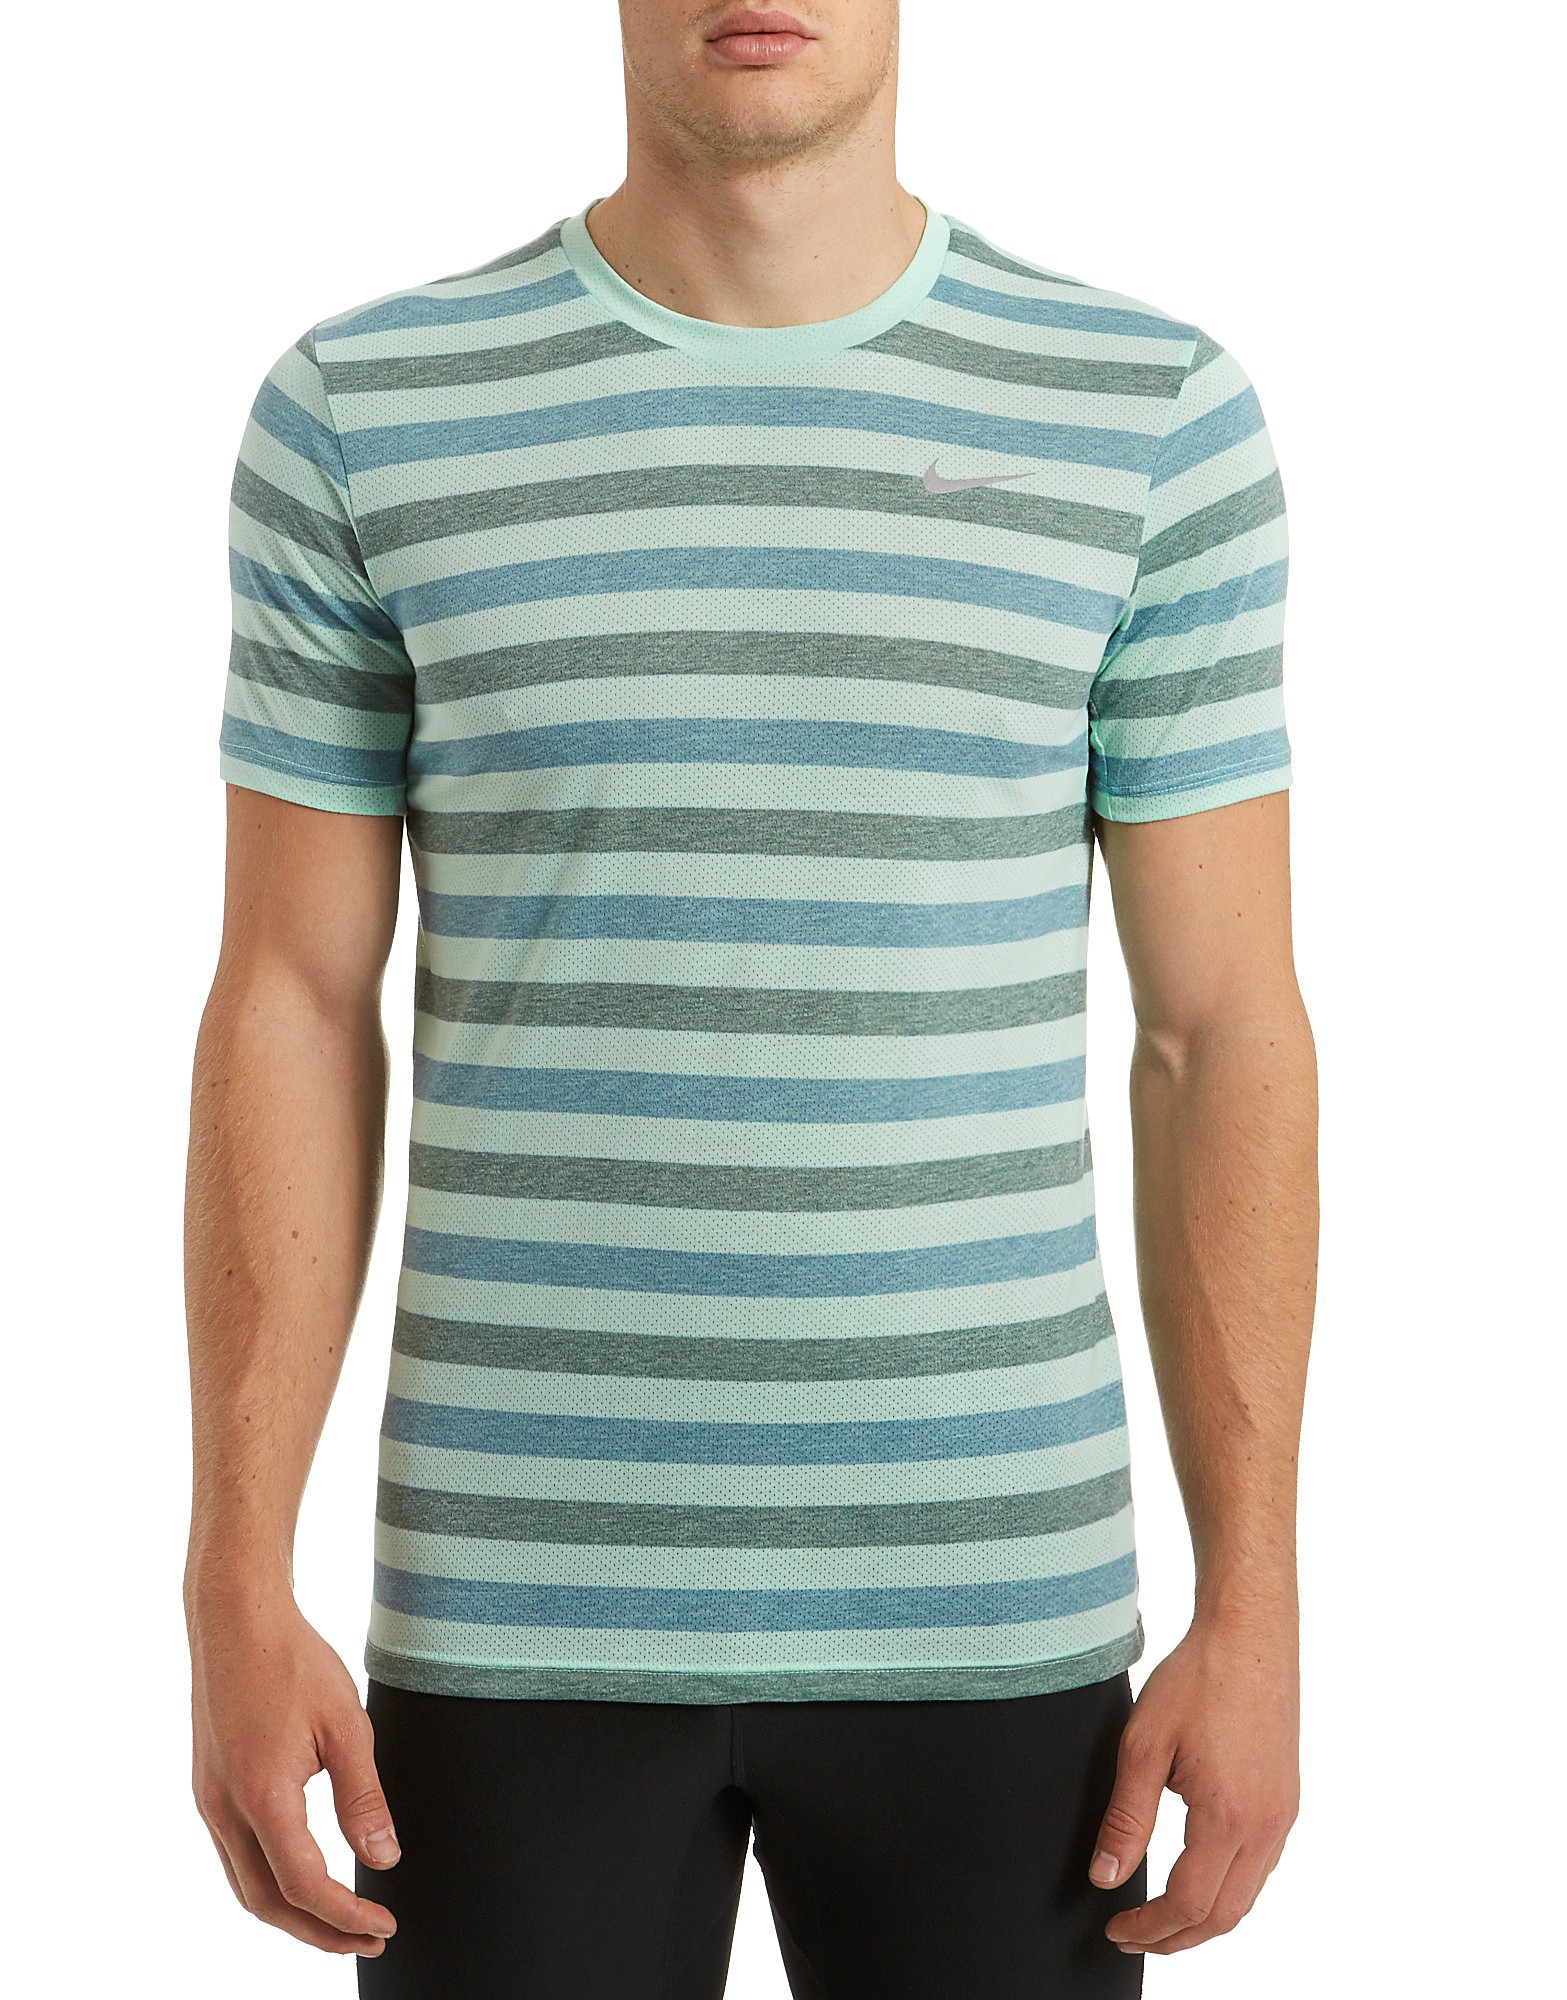 Nike Dri-FIT Tailwind Stripe T-Shirt - review, compare prices, buy online